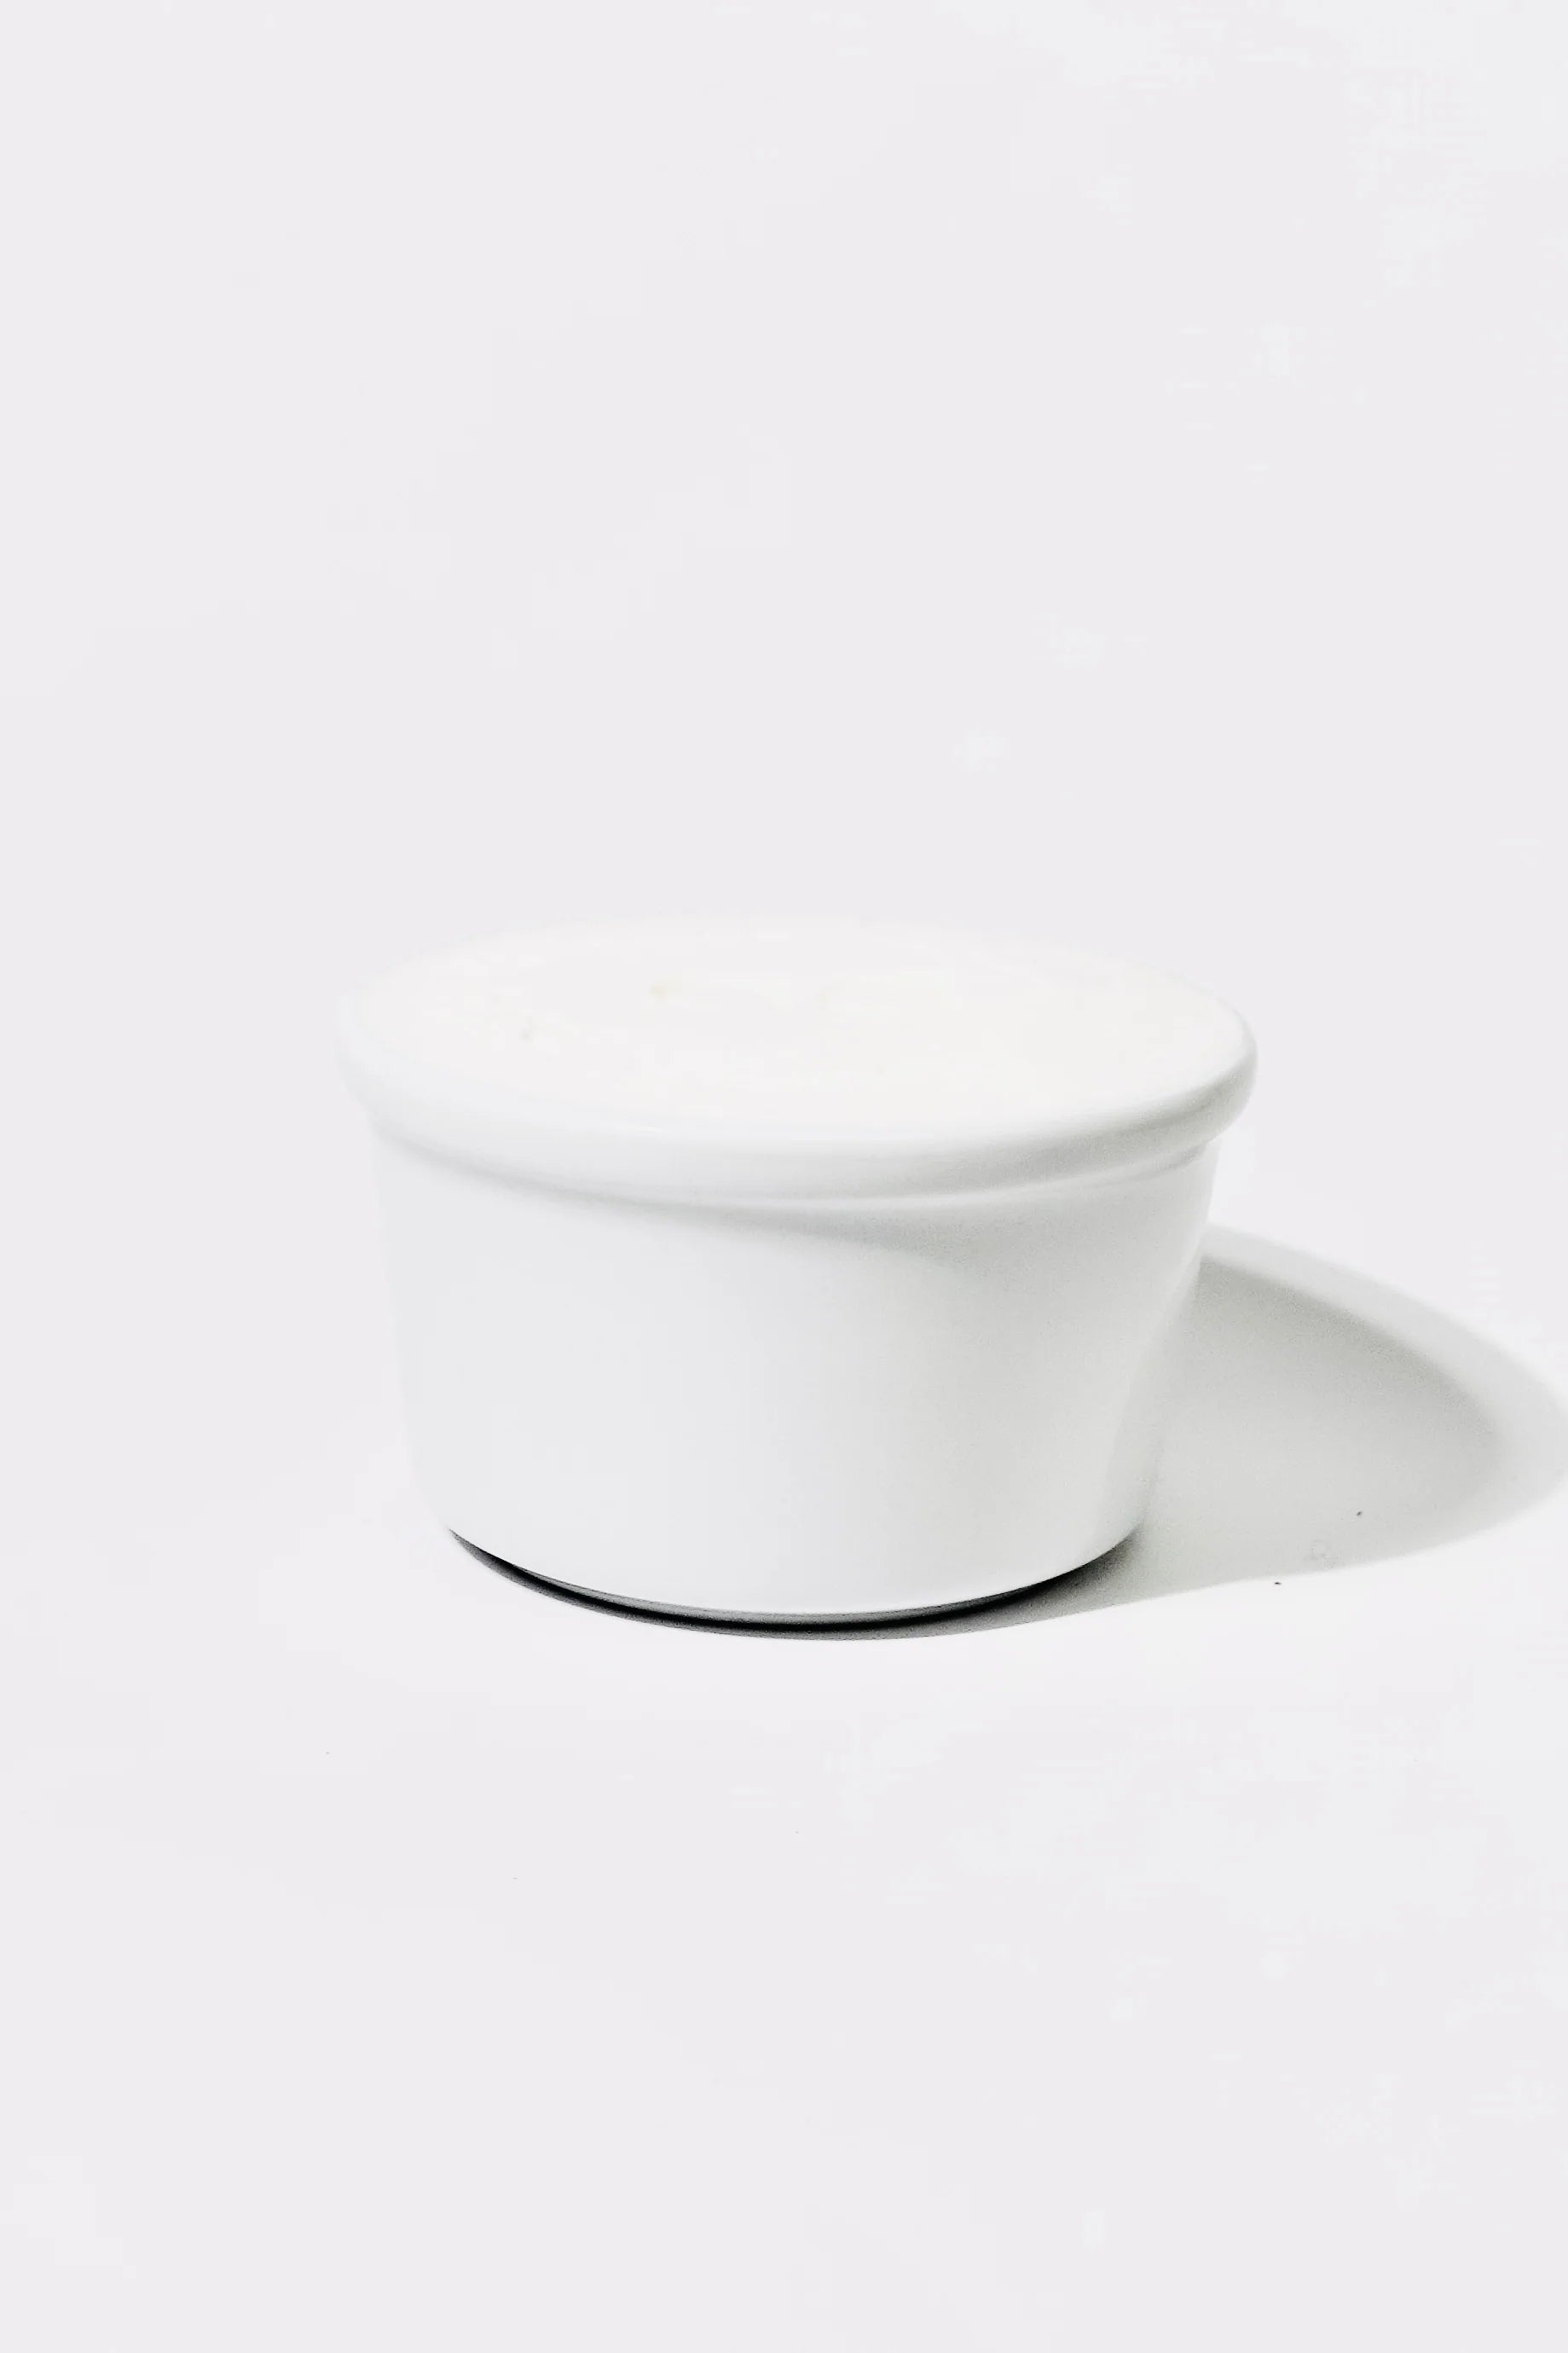 Ardent Goods Dish Soap in Round Porcelain Bowl ™️